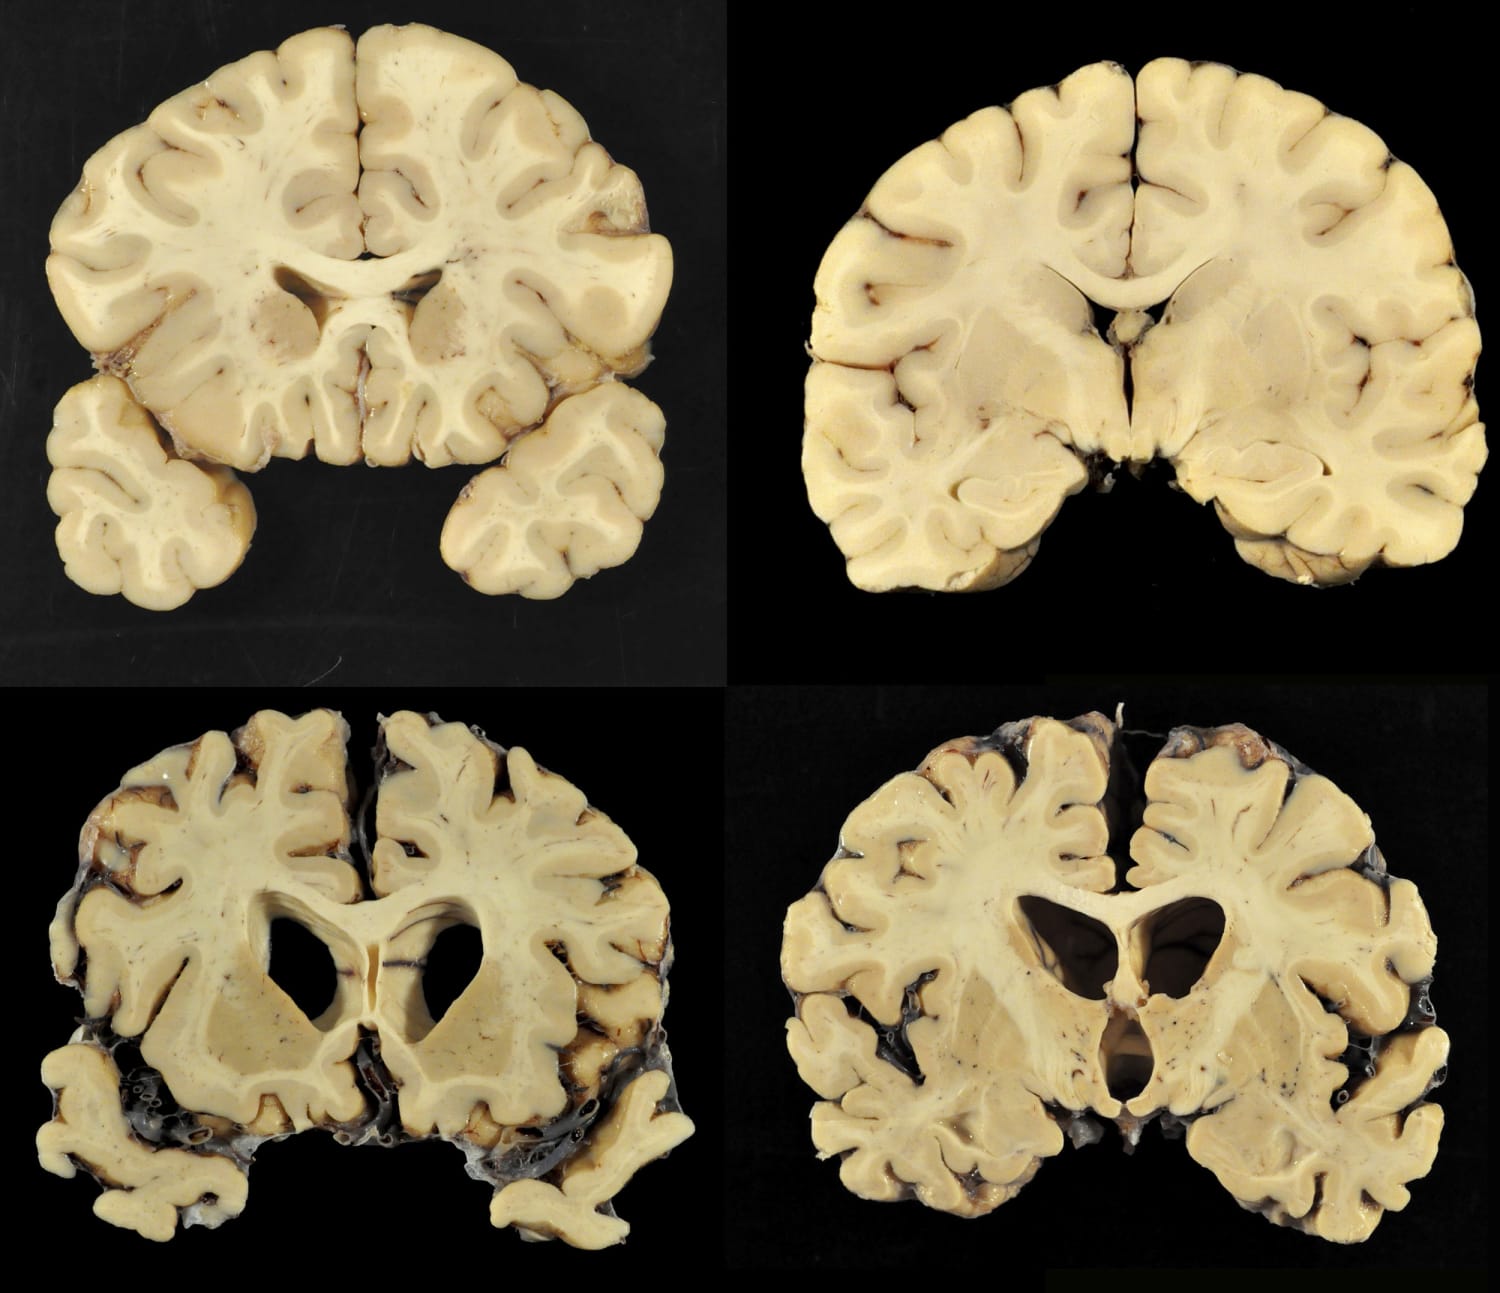 CTE Study Finds Evidence of Brain Disease in 110 Out of 111 Former NFL  Players